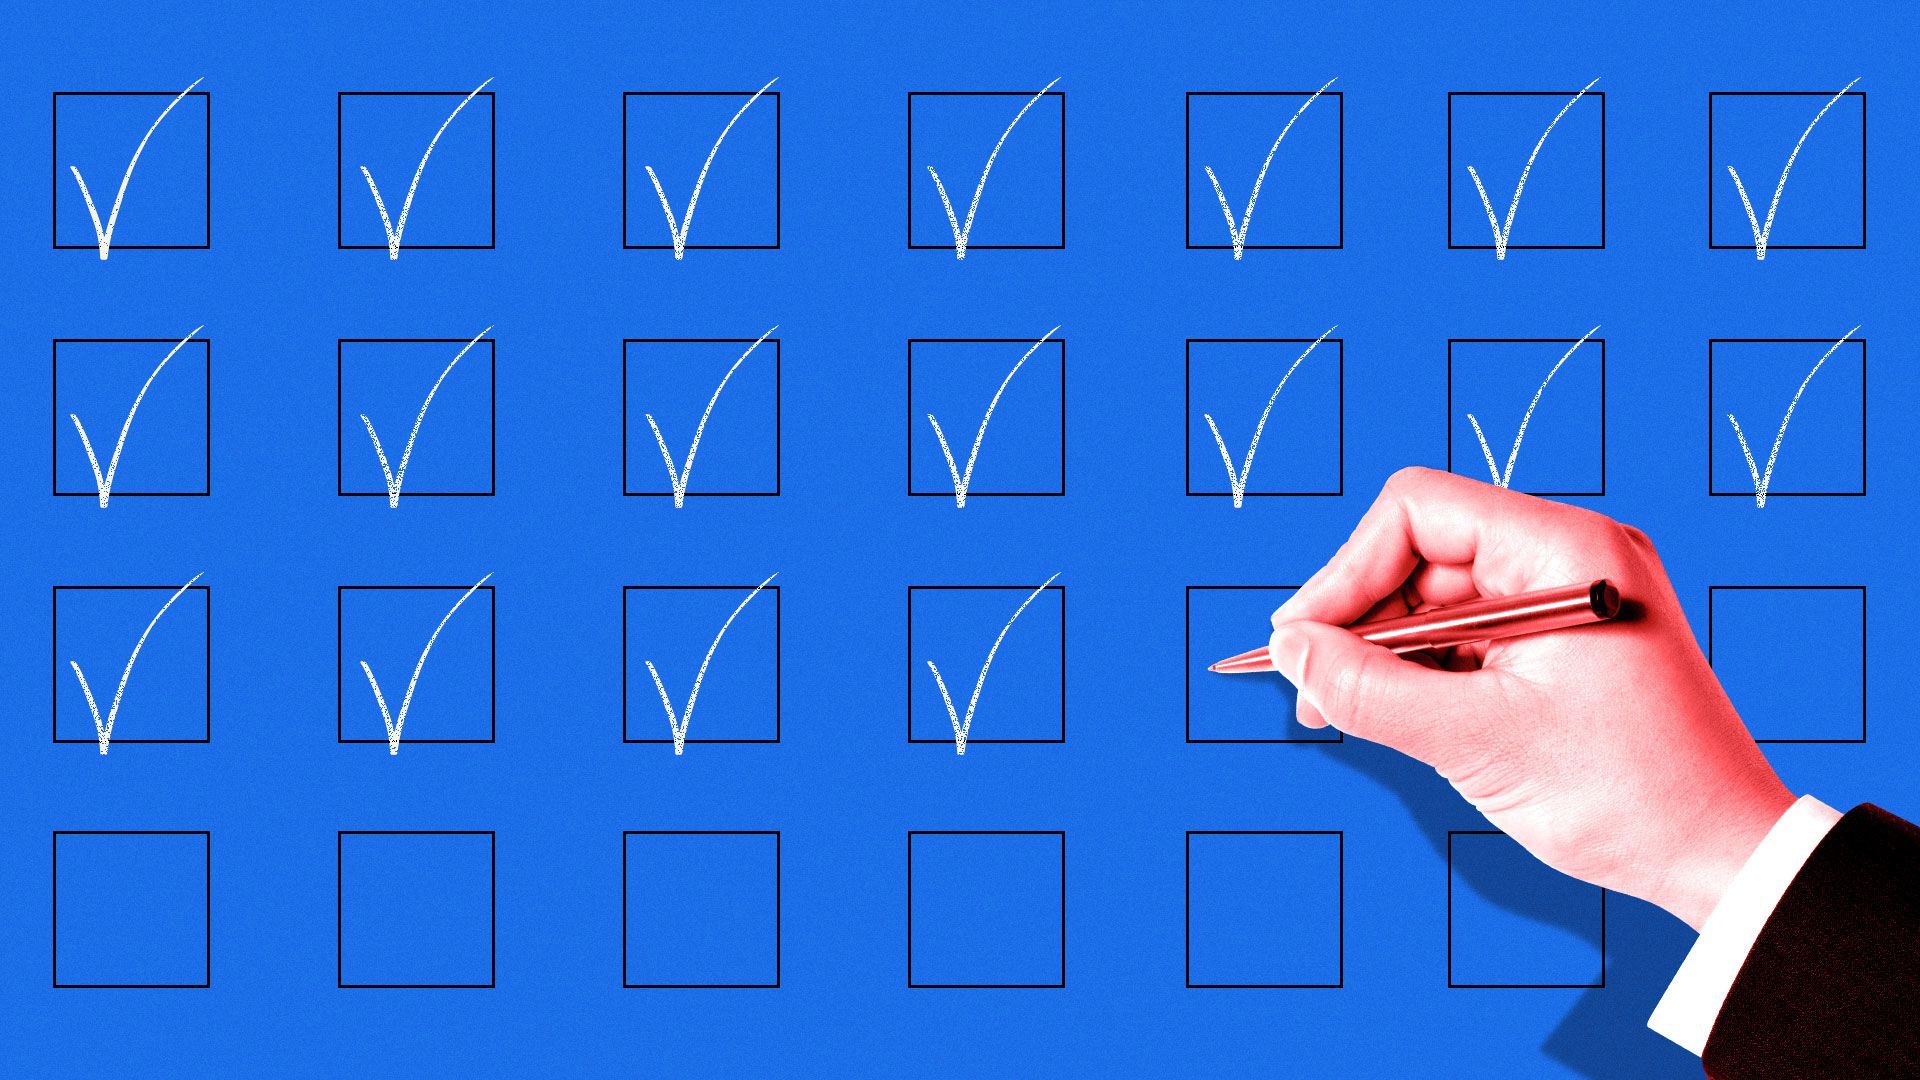 Illustration of a pattern of checkboxes filled with checkmarks. Hand is about to fill empty checkbox.